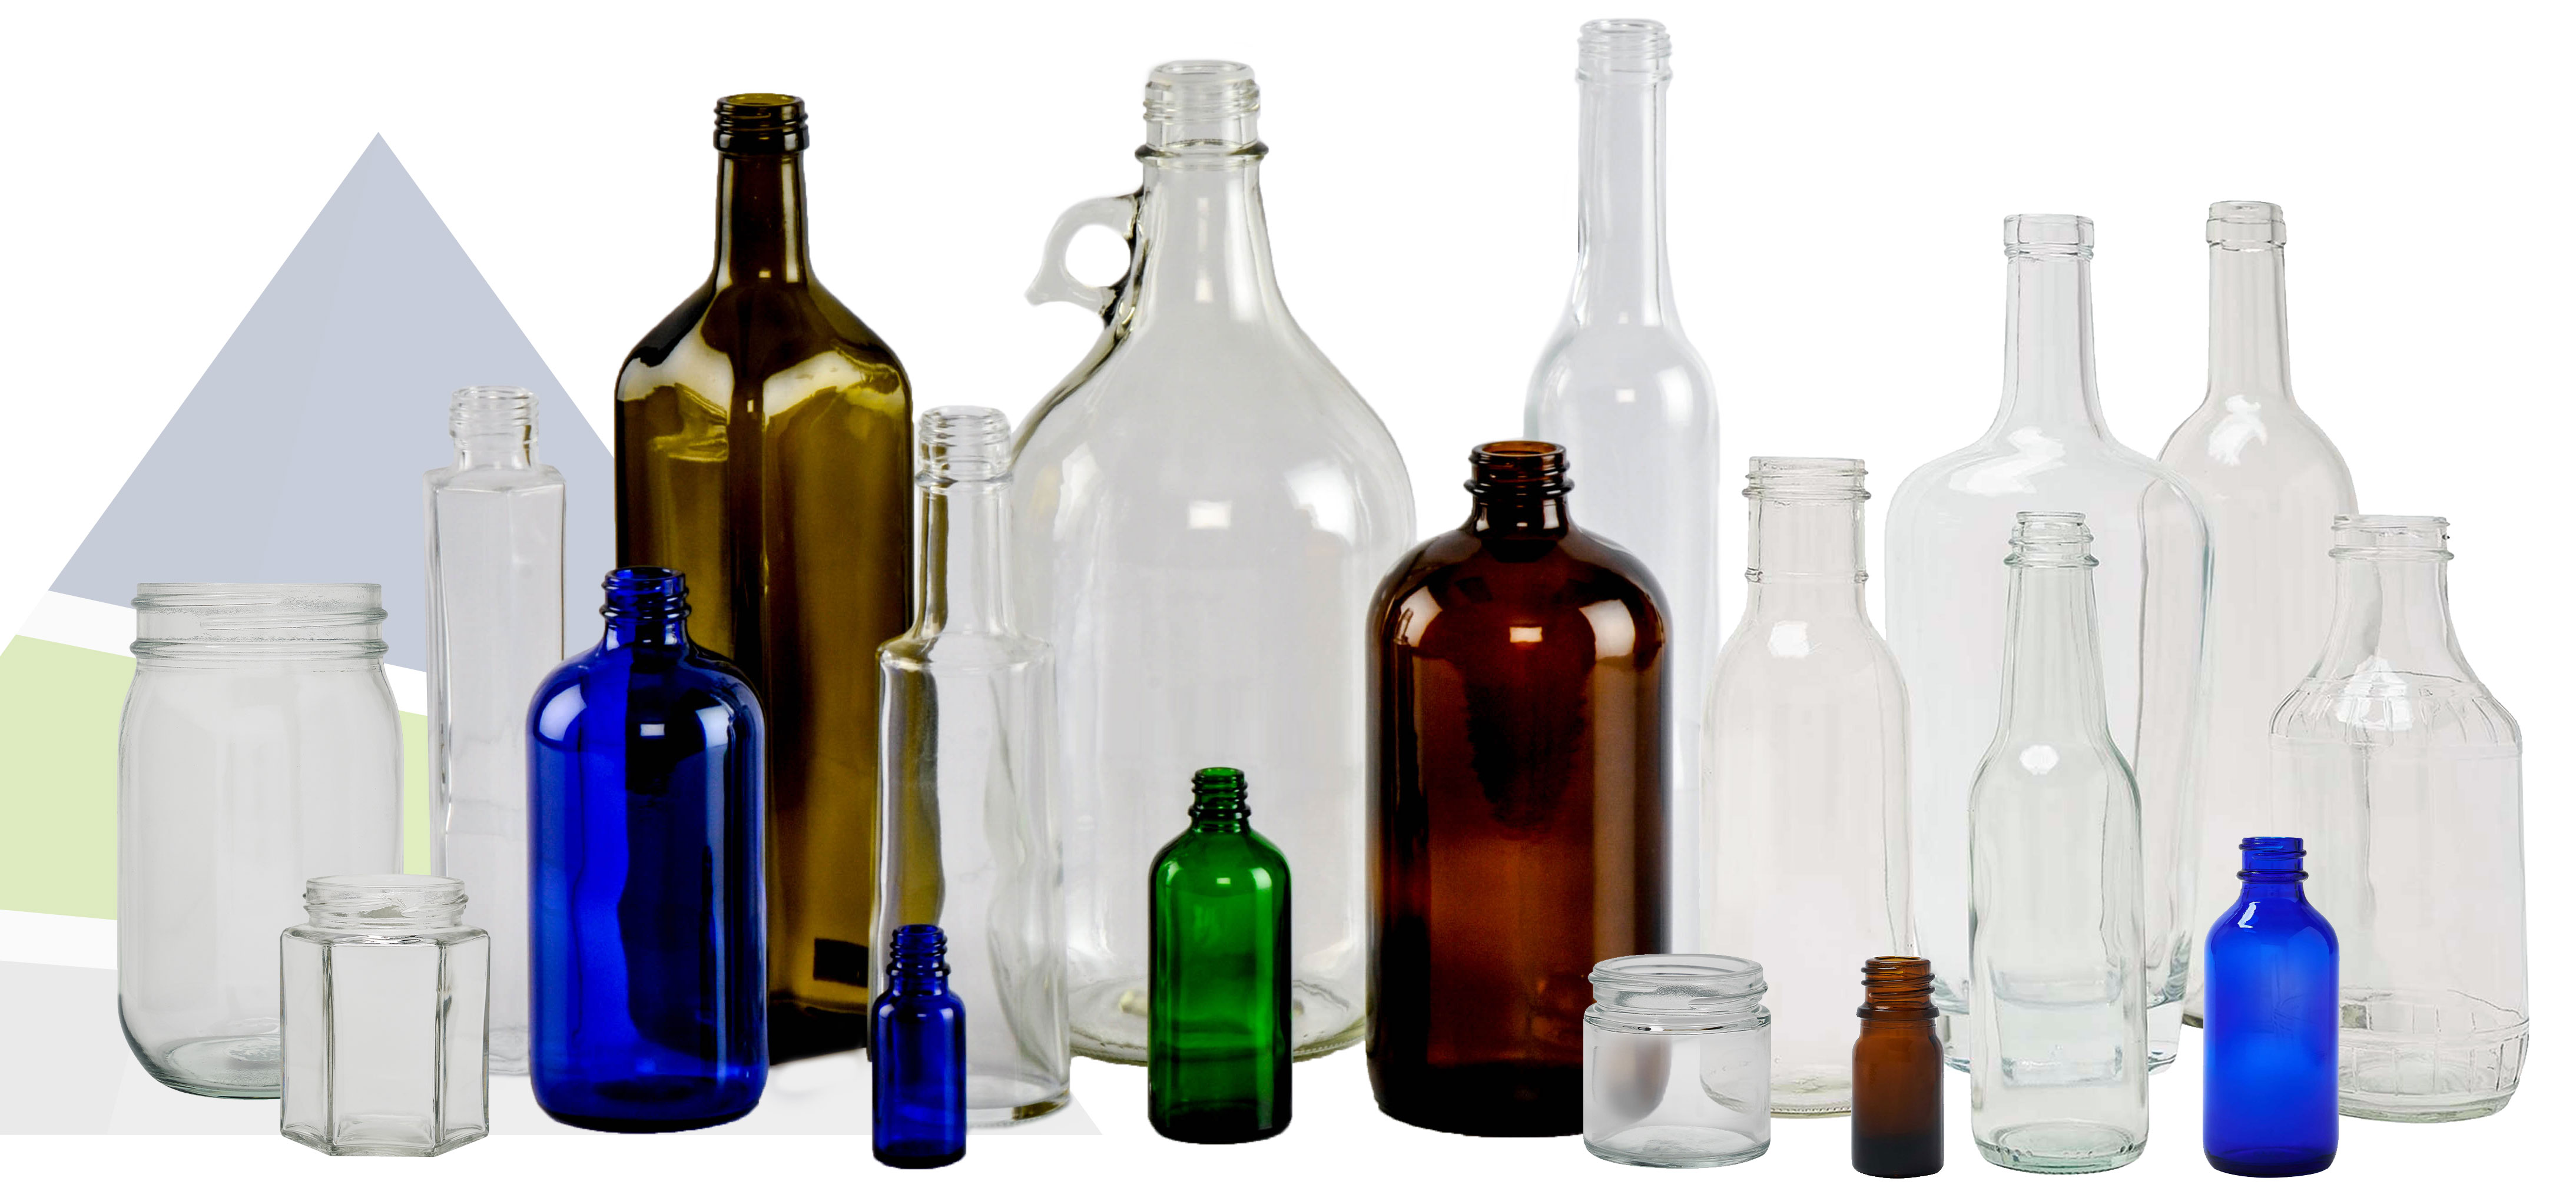 Assortment of Sustainable Glass Bottles and Jars